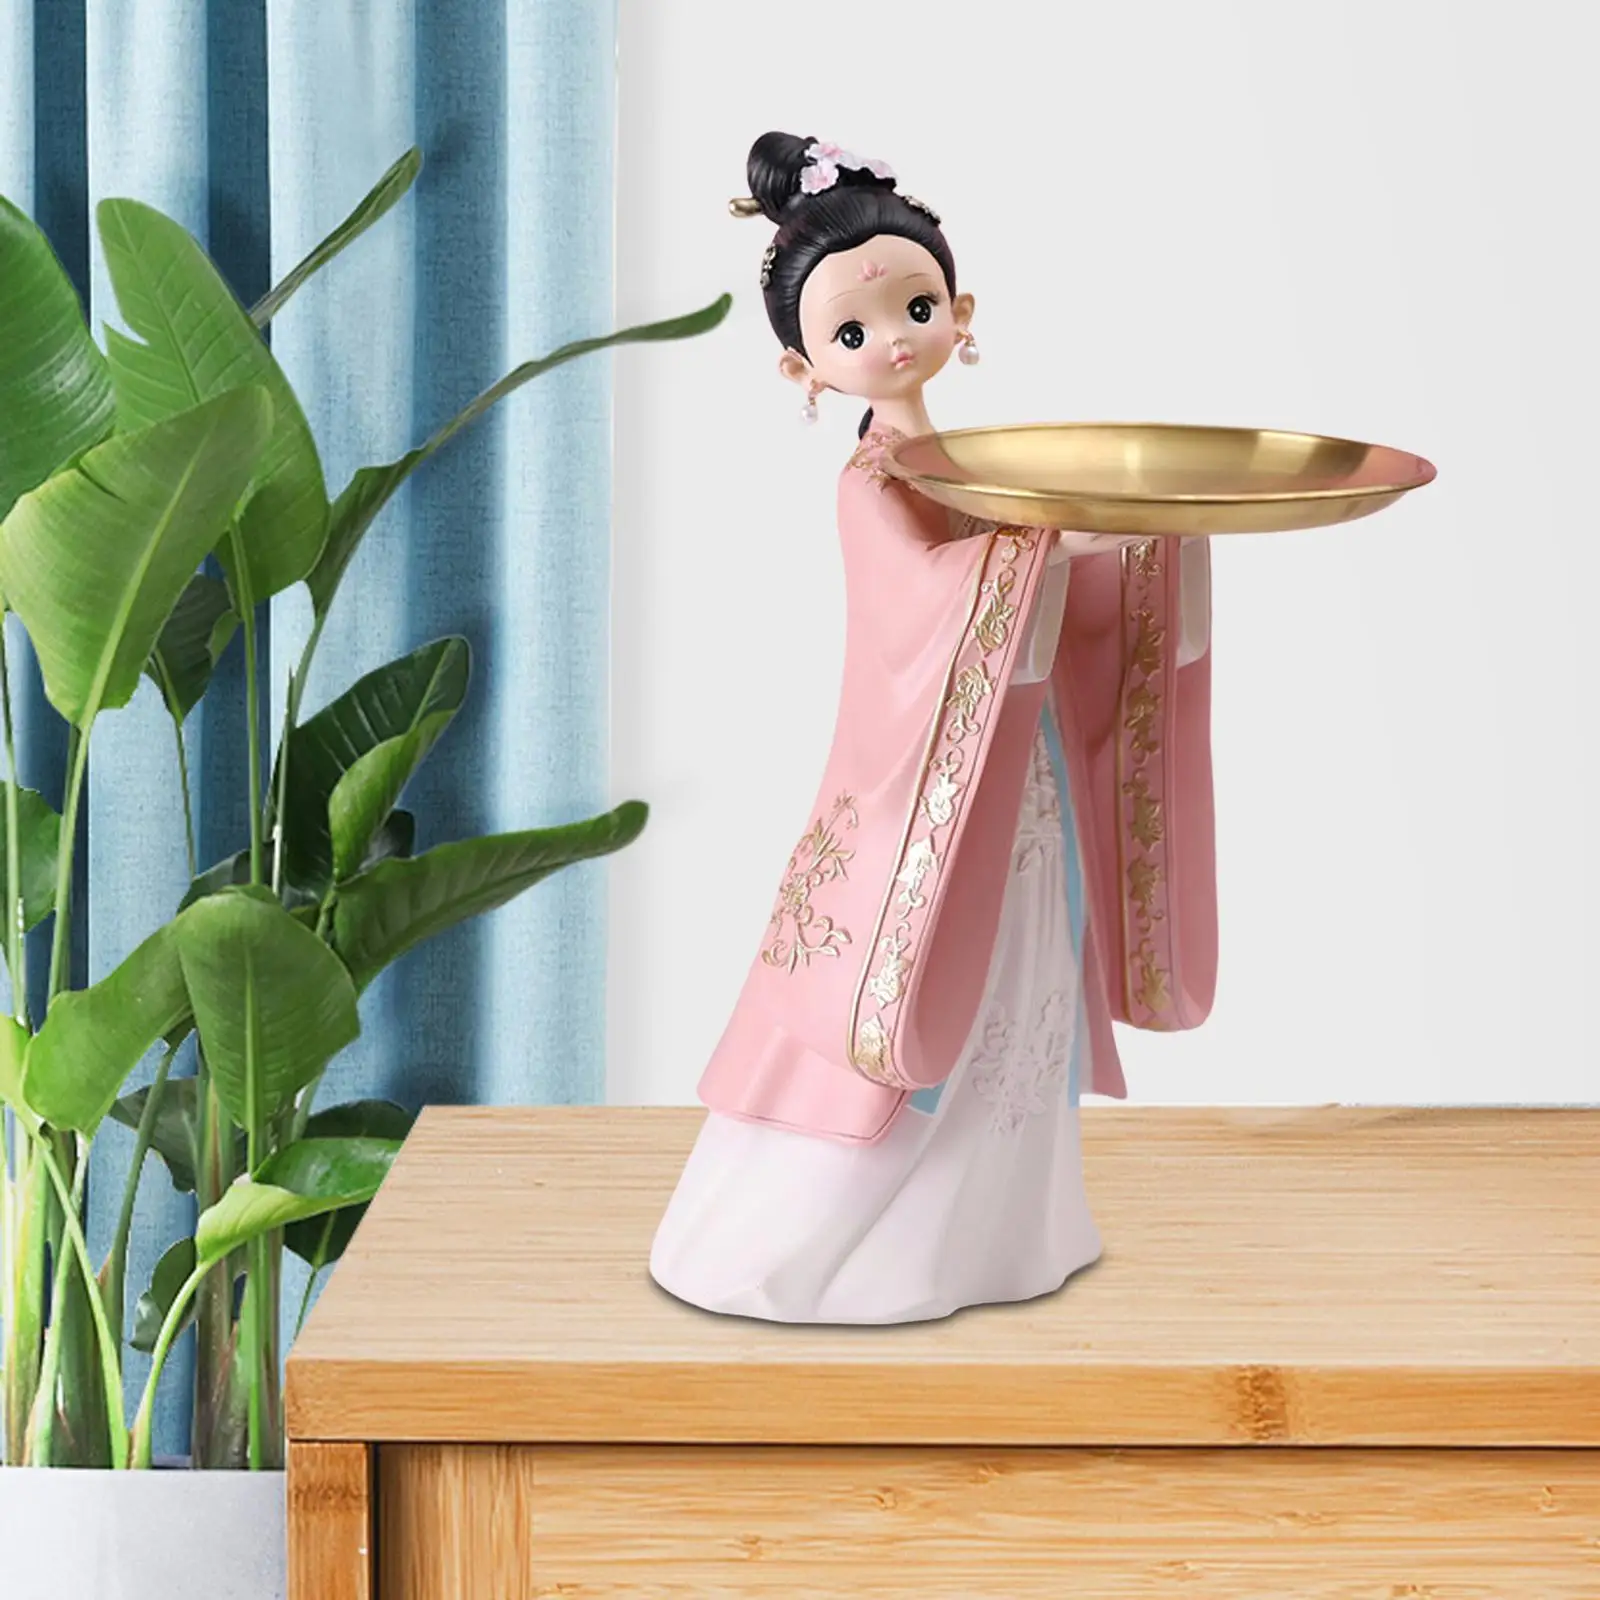 Girl Resin Statues Figurine Sculptures Jewelry Storage Counter Holder Decorative Serving Tray for Candy Table Decor Living Room